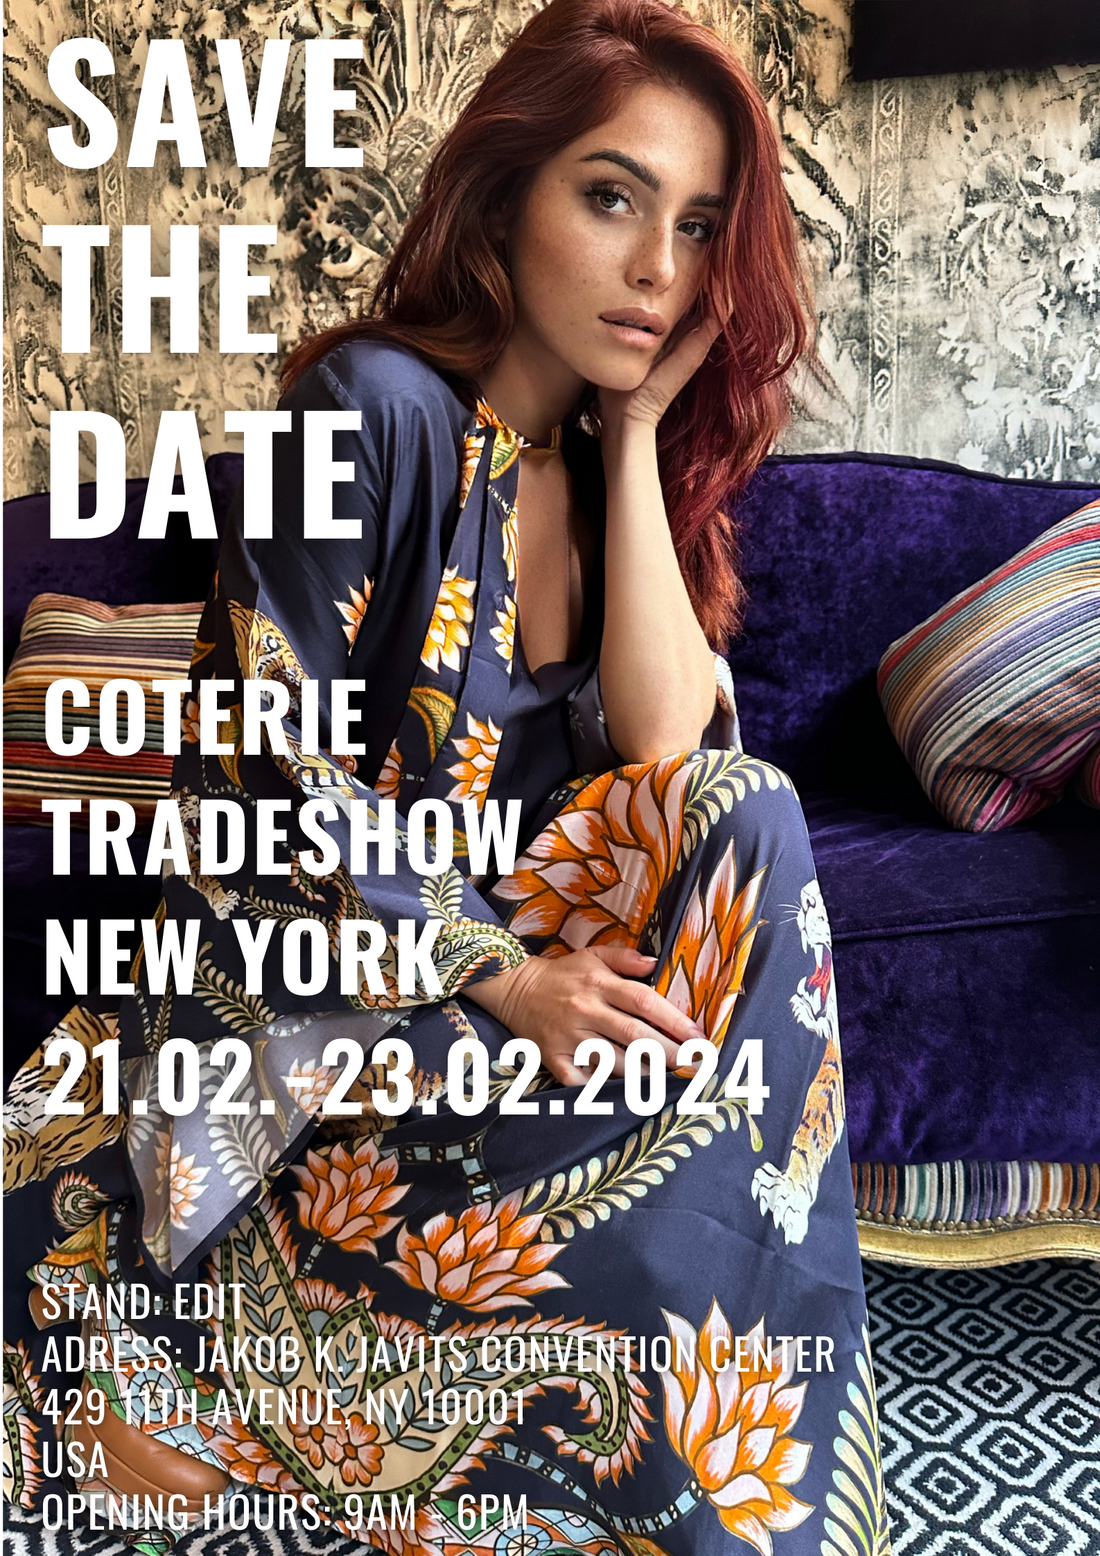 MEET US AT THE COTERIE TRADESHOW IN NEW YORK 21.02.-23.02.2024